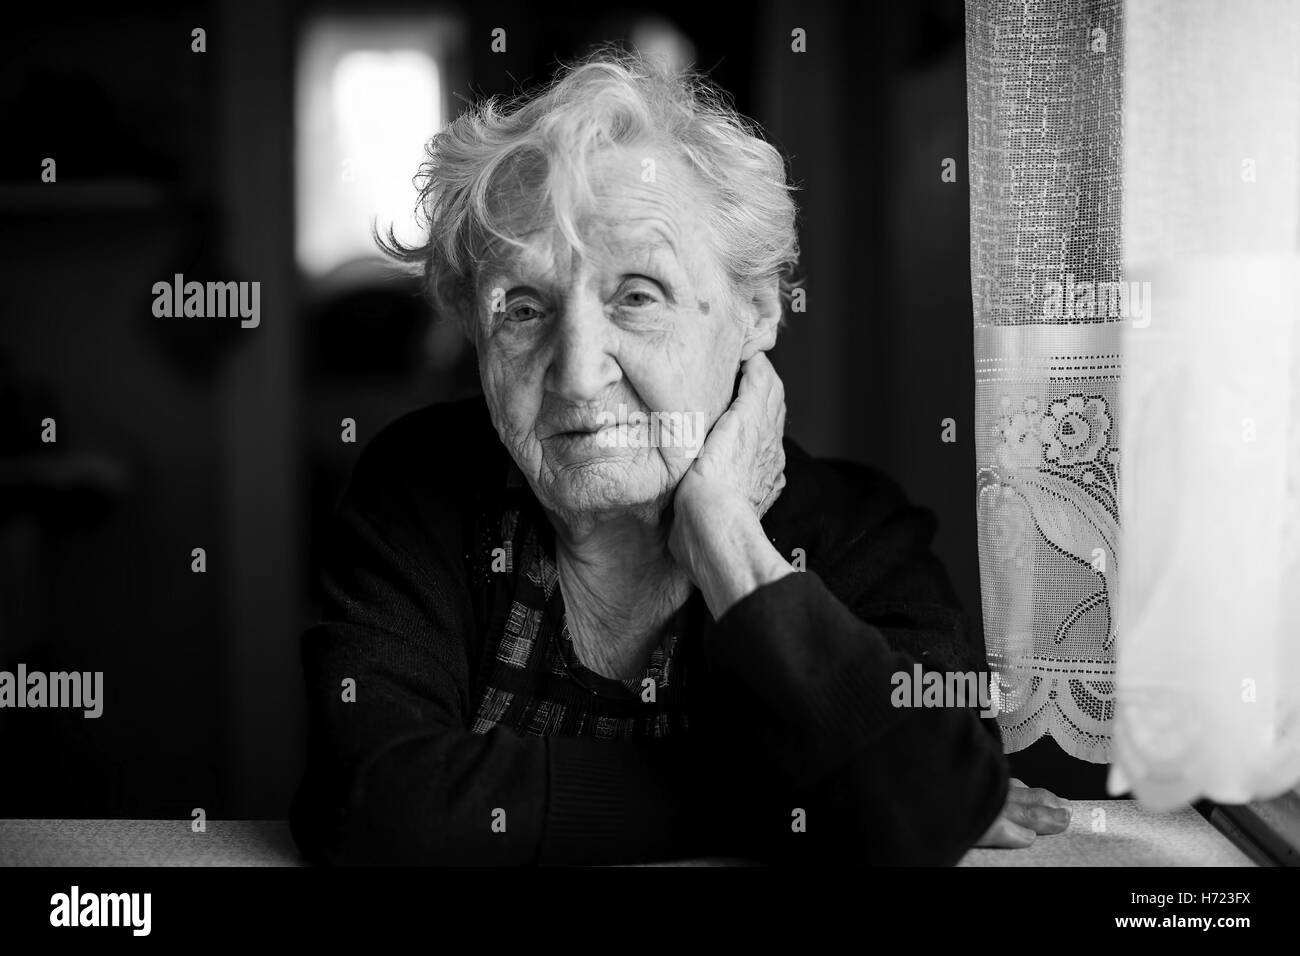 Middle older woman smiling Black and White Stock Photos & Images - Alamy